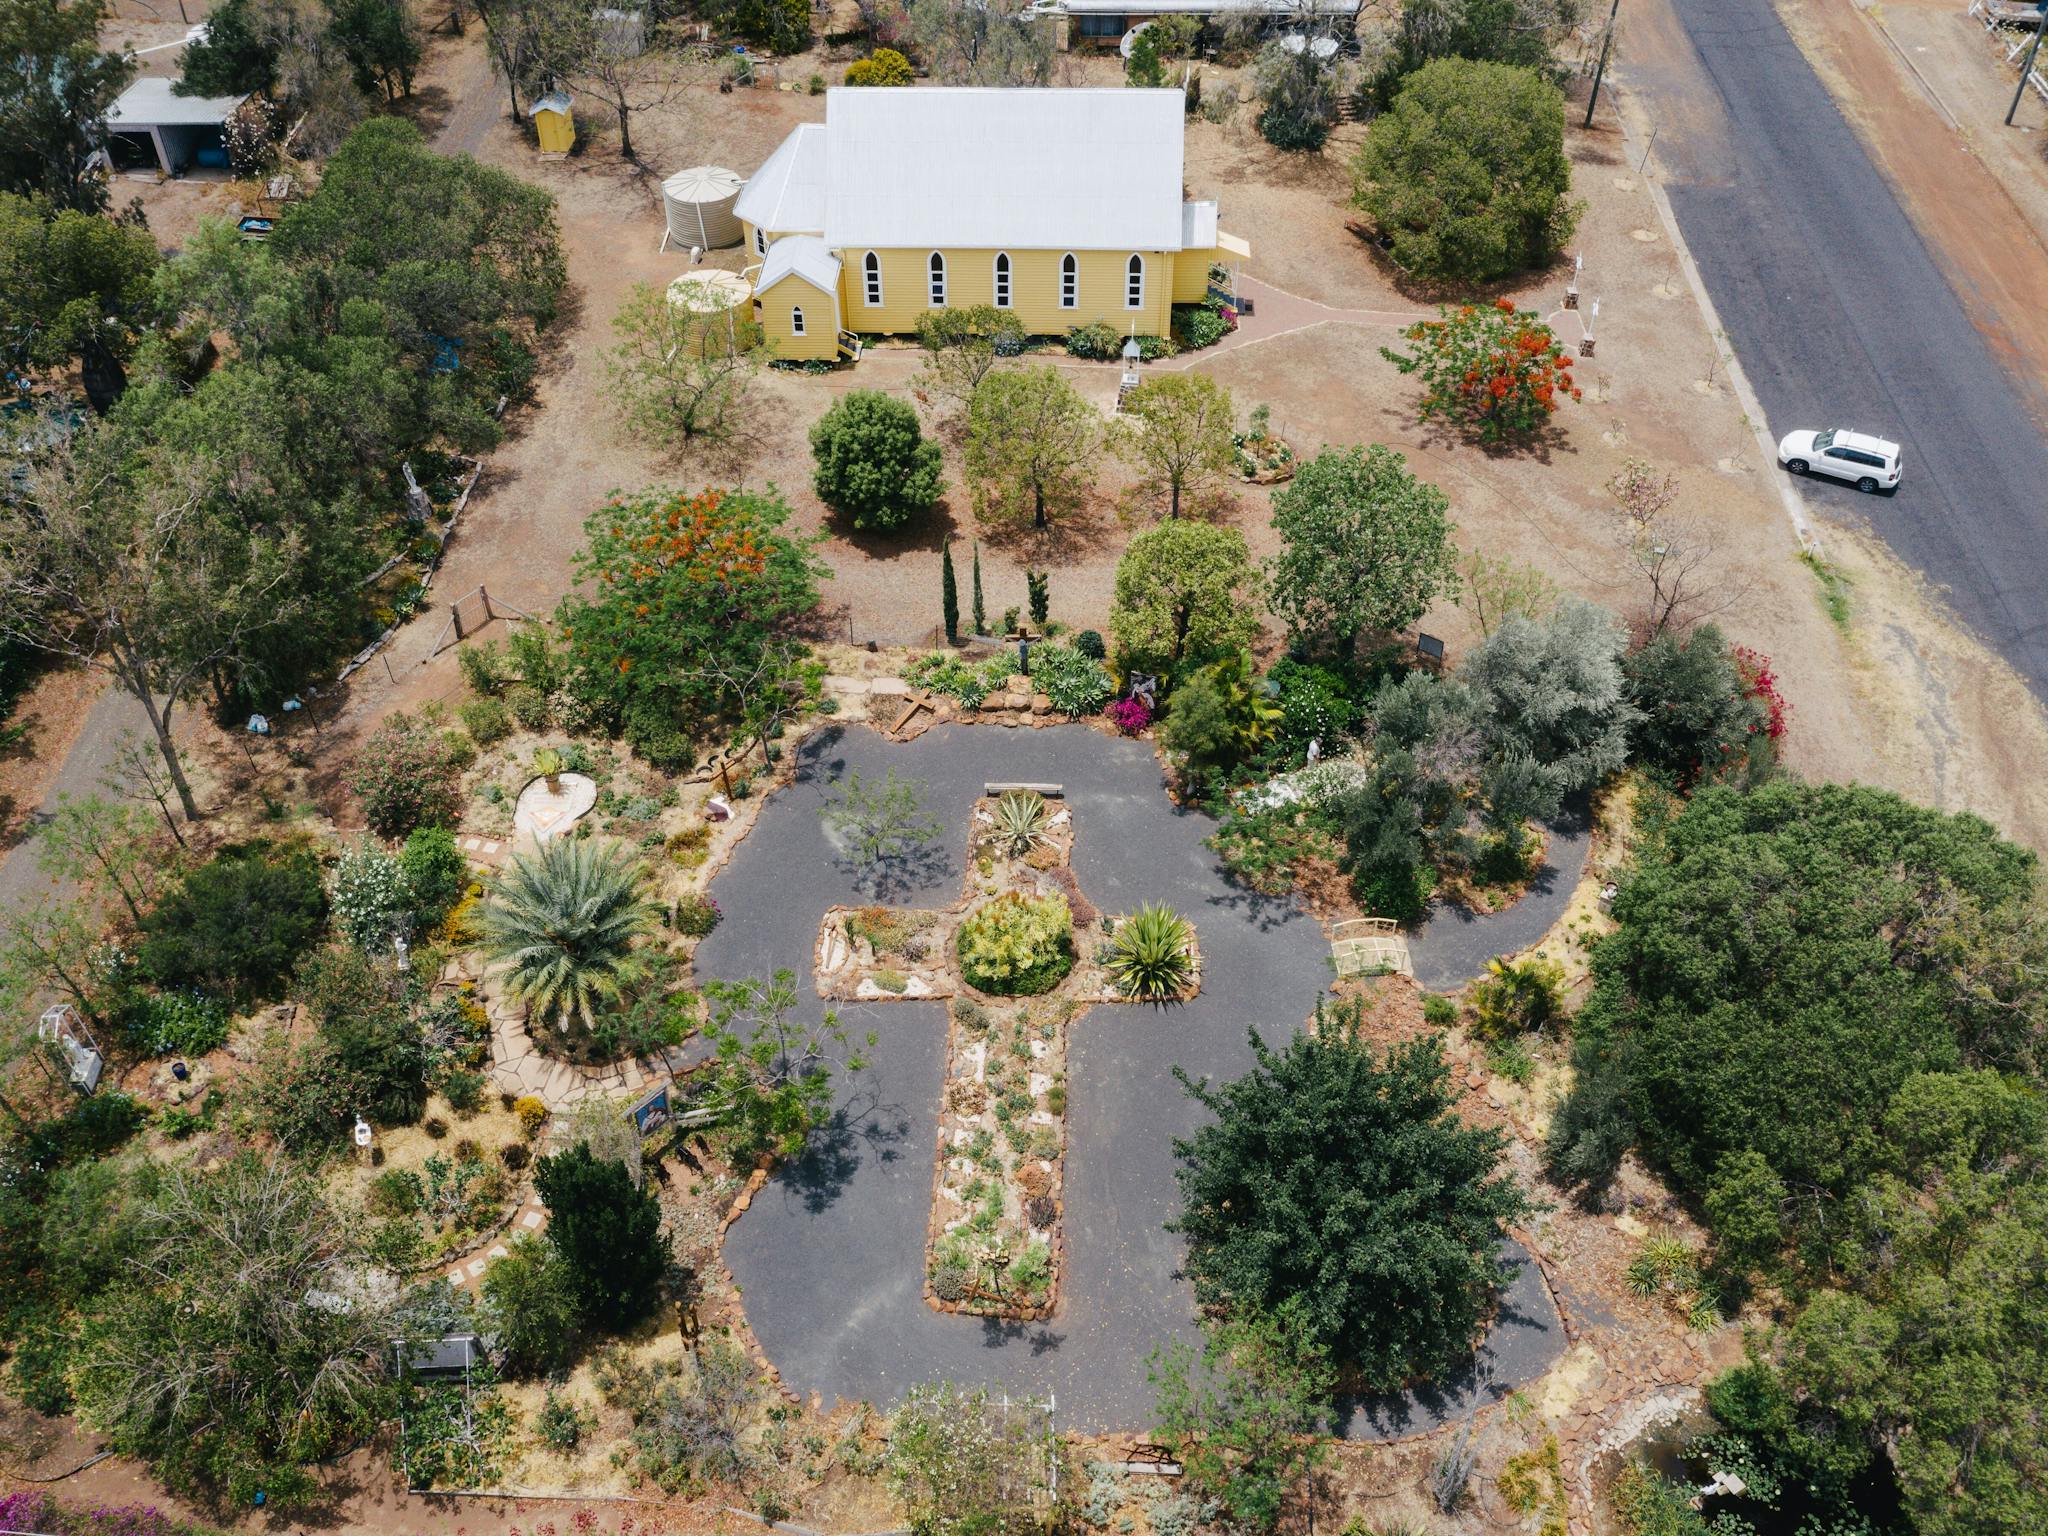 Aerial view of Church and garden